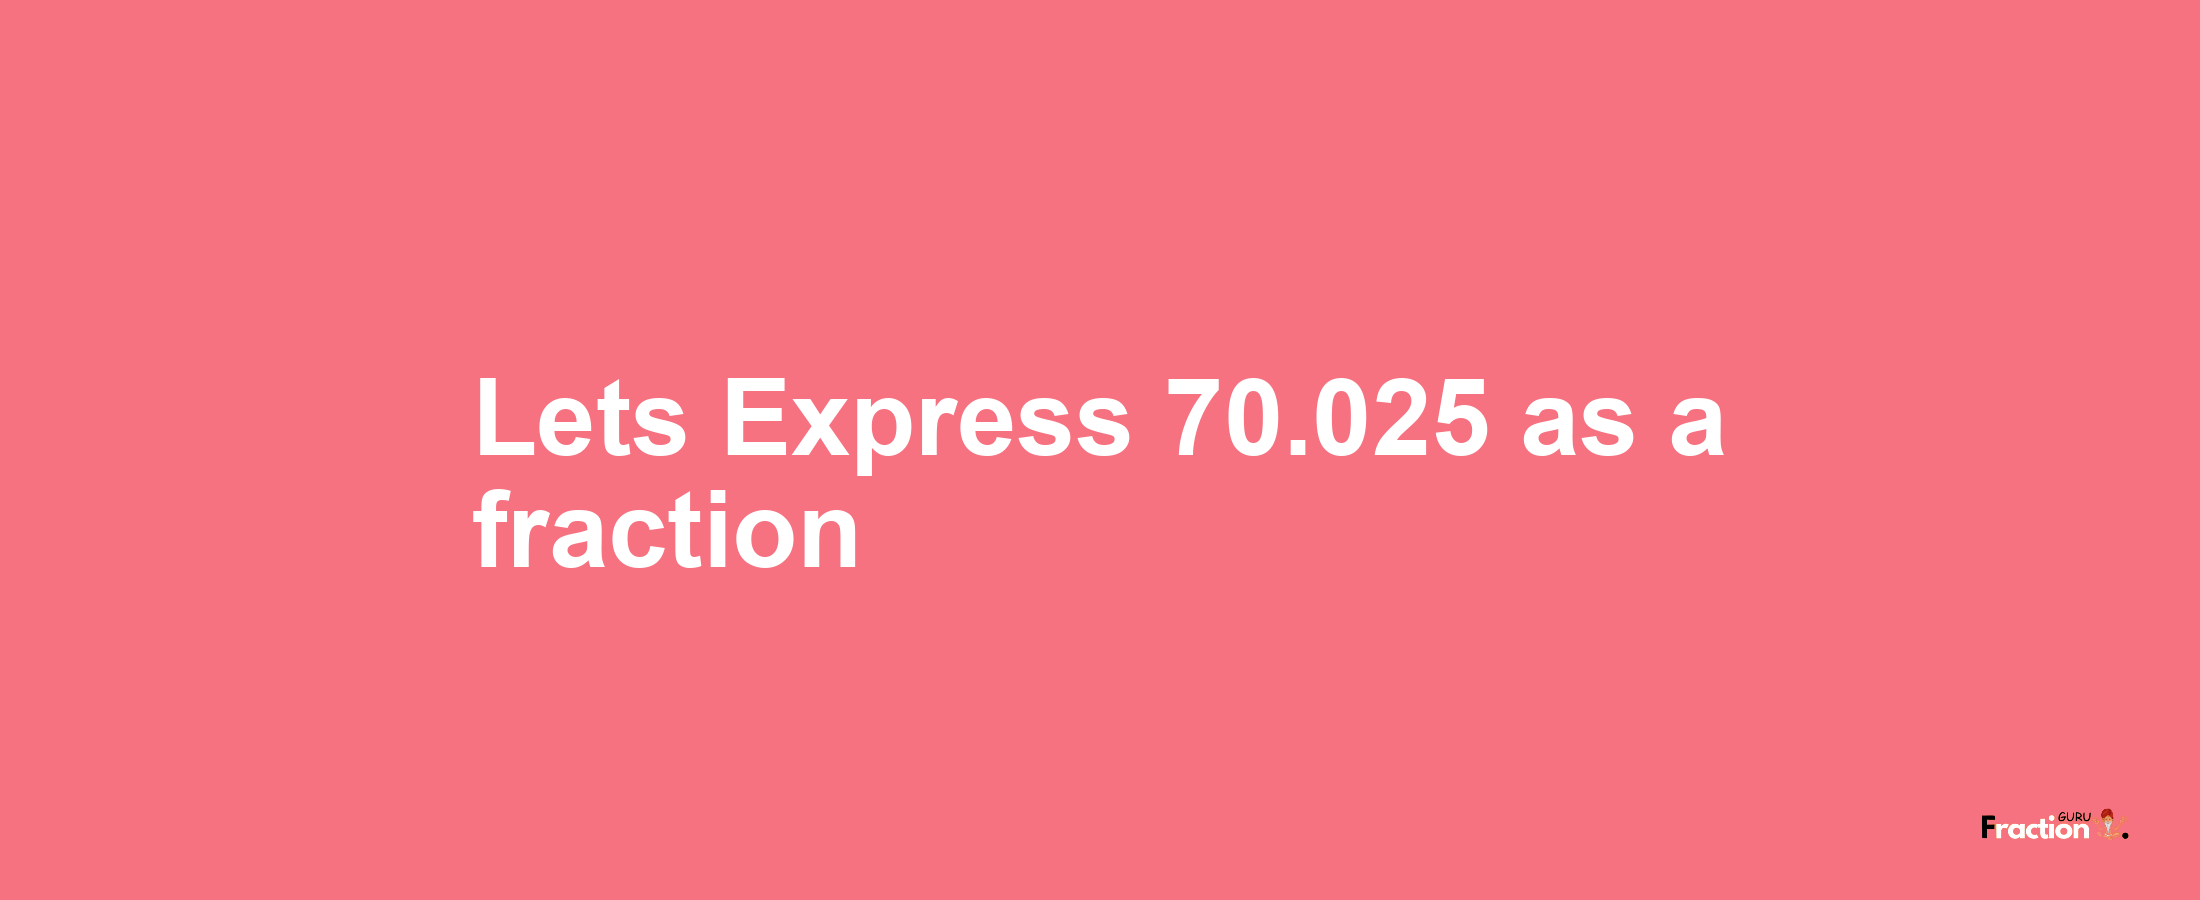 Lets Express 70.025 as afraction